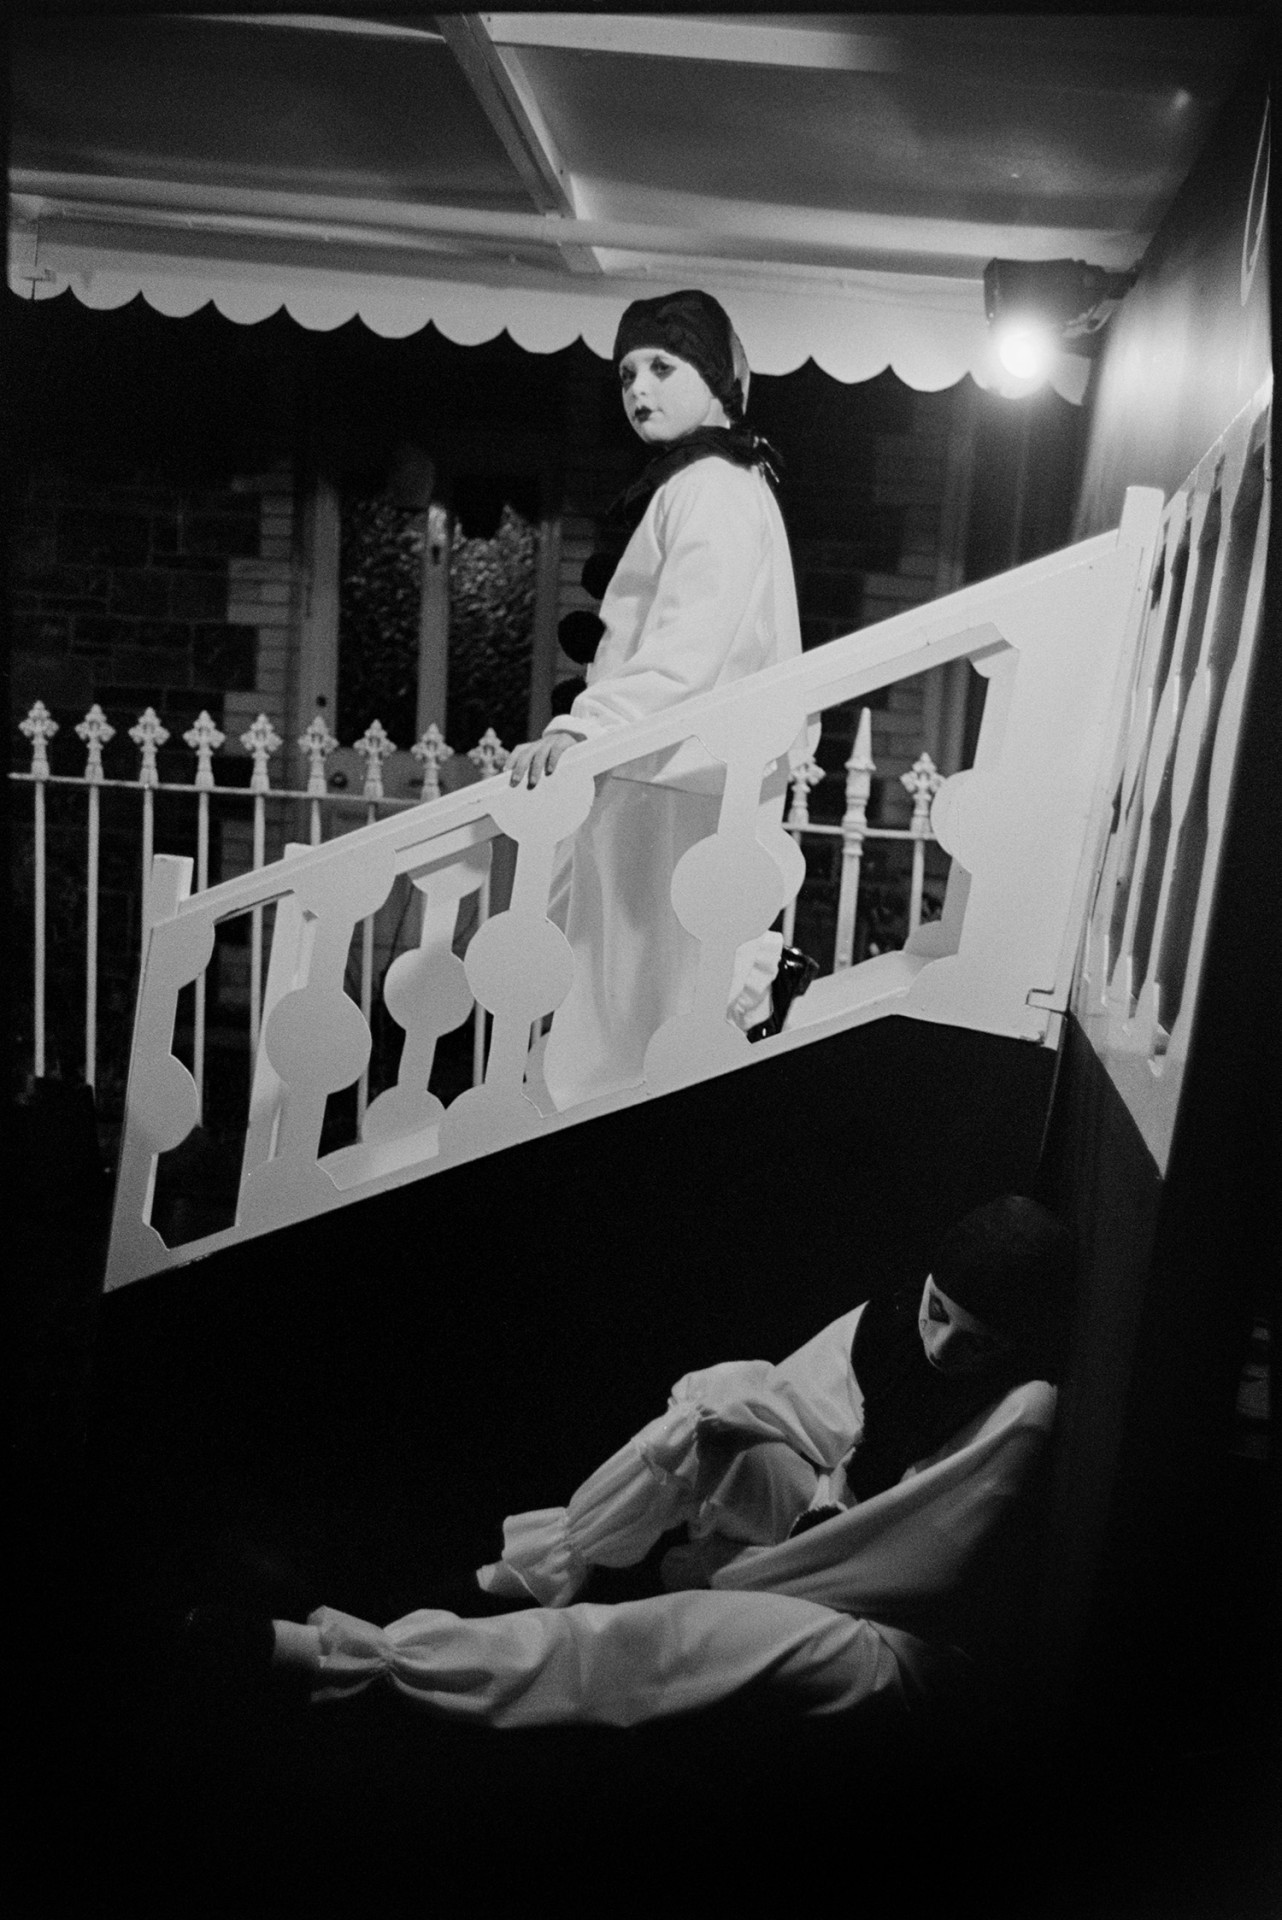 Carnival parade at night floats. 
[Two people dressed as Pierrot characters on a carnival float at Dolton Carnival.]